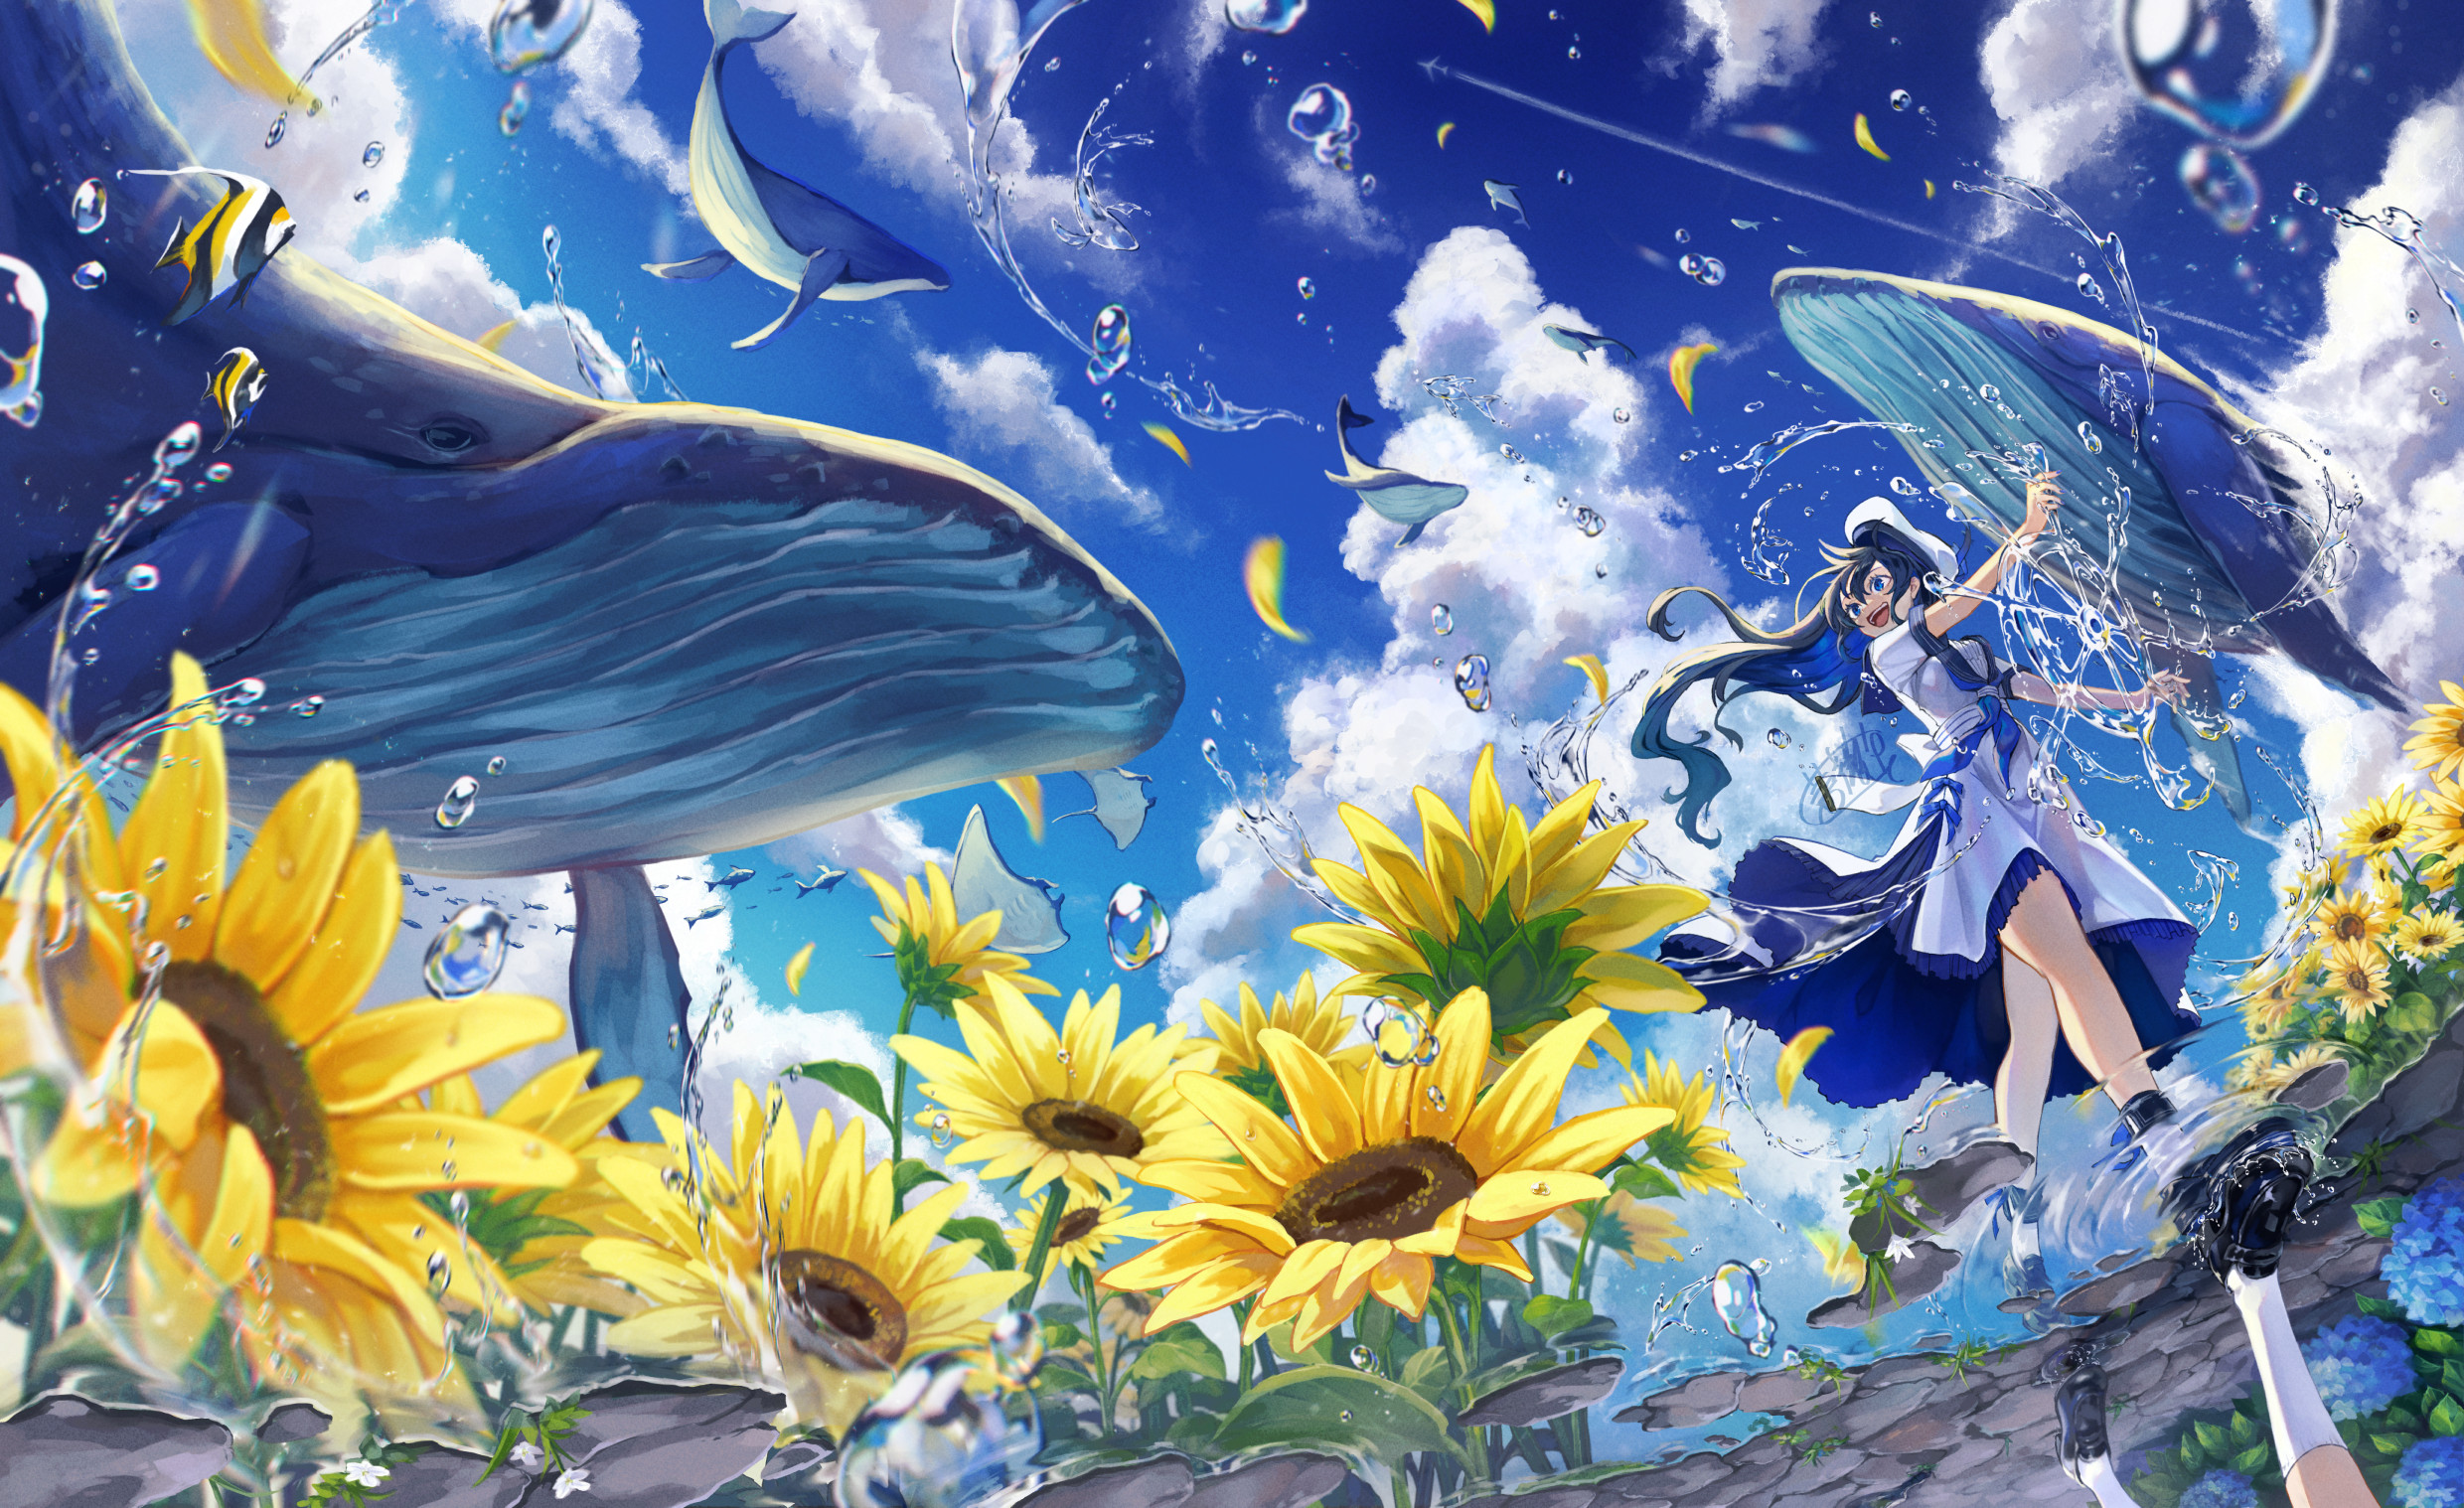 Anime 2480x1518 Canned Rose flying whales looking away low-angle yellow flowers cumulus water drops tropical fish open mouth signature berets sky fish reflection sailor uniform women outdoors flowers hat whale smiling sunflowers dark blue hair puddle water dress